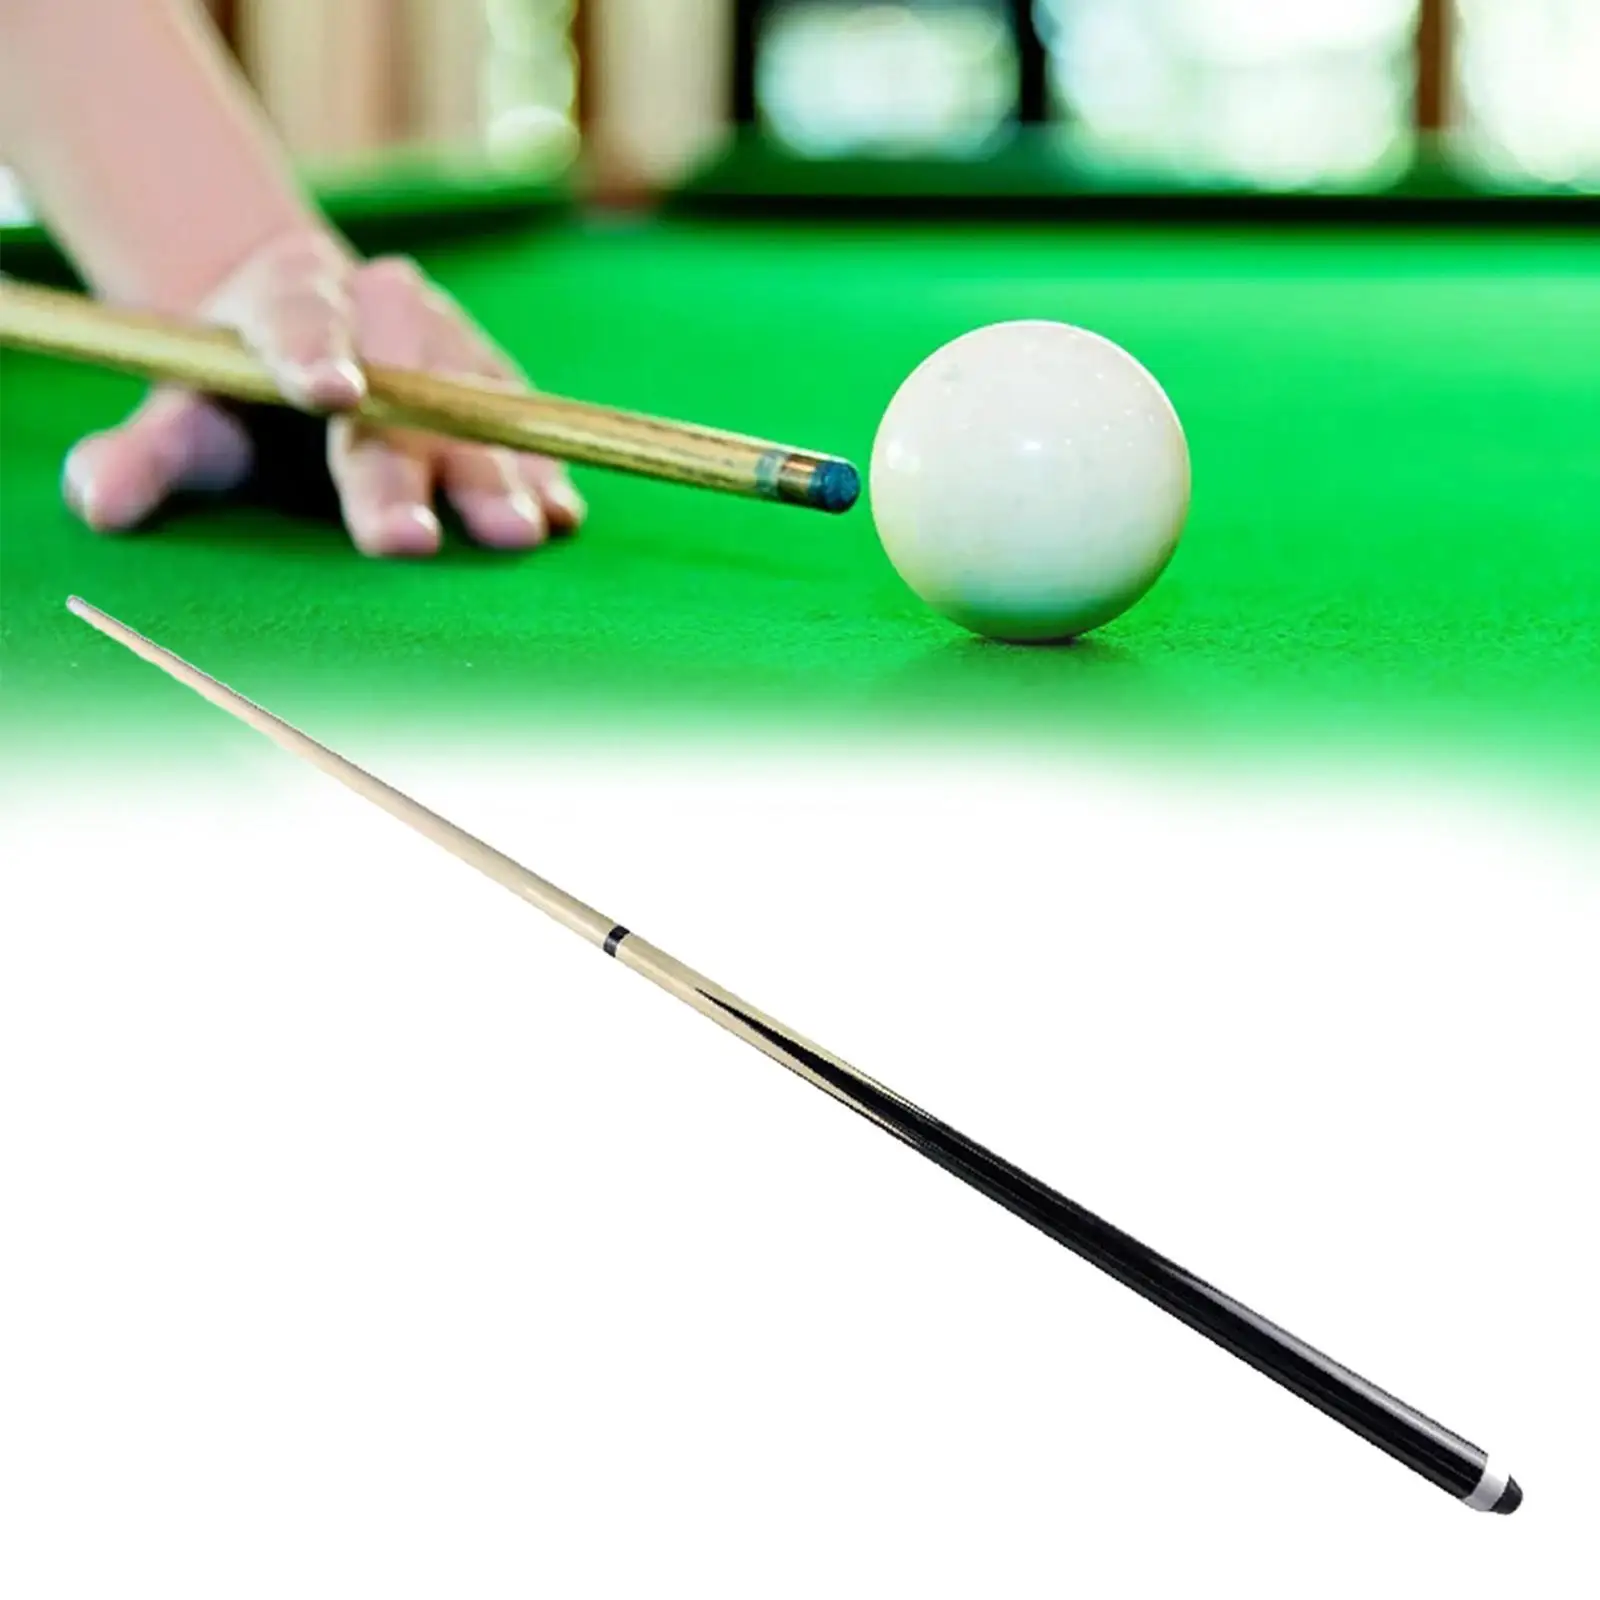 Small Pool Cue, Kids Pool Cue Children`s Exercise Cue, Training Hardwood Pool Stick, Pool Table Kids, Pool Cue Stick